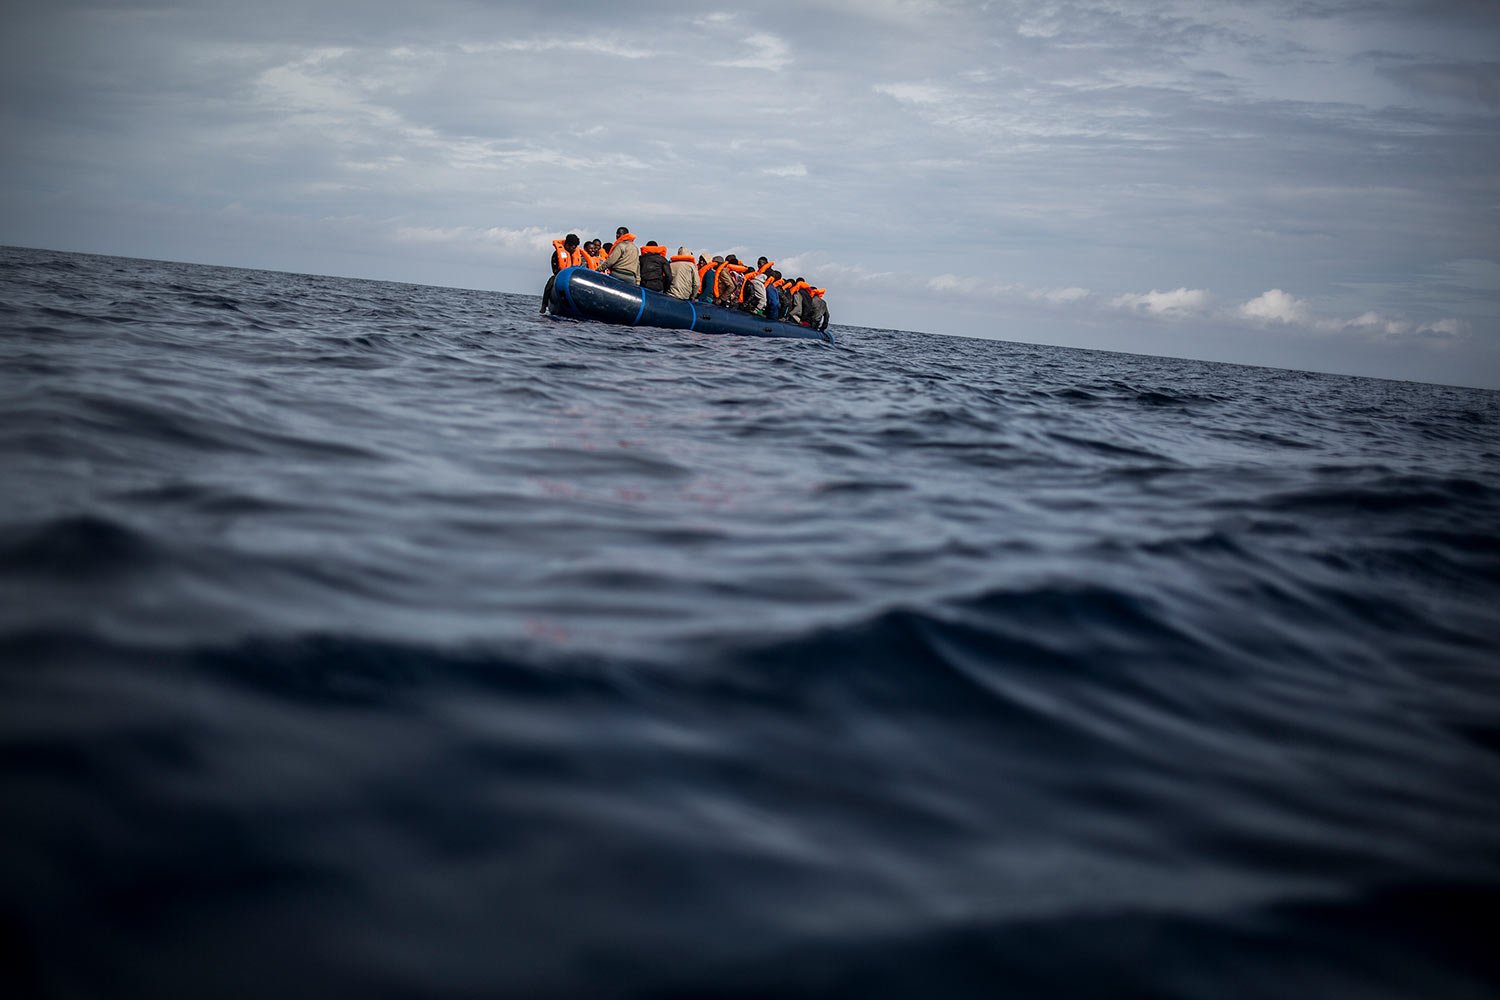  Migrants sail on a rubber dinghy after Spanish NGO Pro activa Open Arms spotted and rescued them at Alboran Sea, about 40 miles (64 kms) from the Spanish coasts, Oct. 11 2018. (AP Photo/Javier Fergo) 